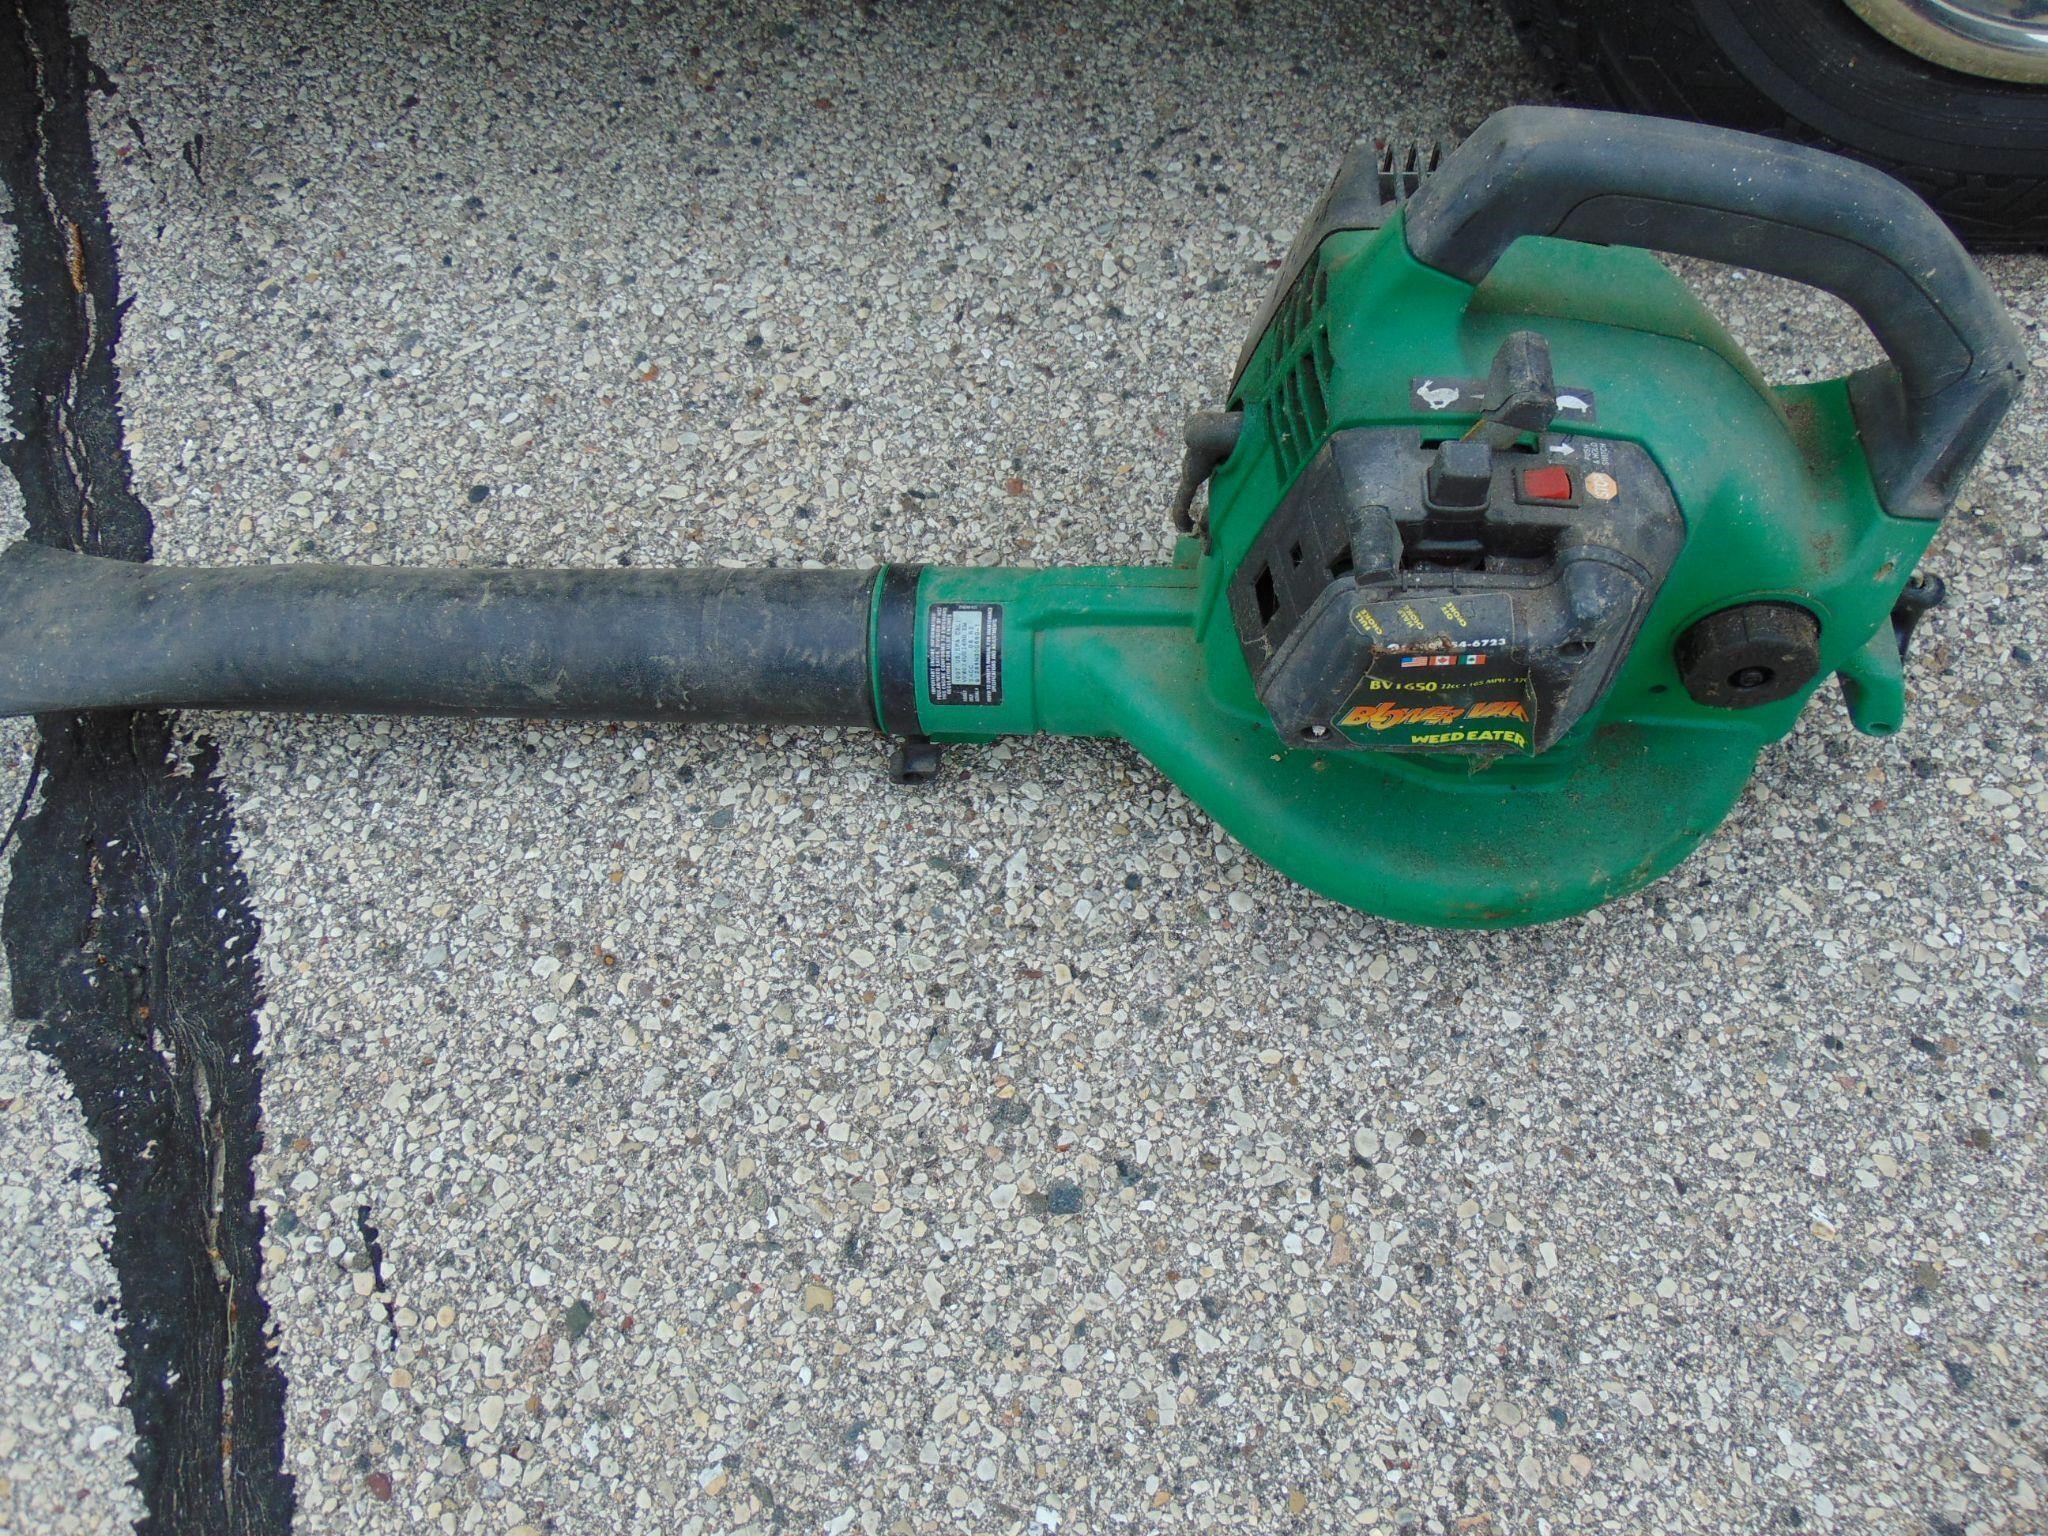 Weedeater Leaf Blower - Gas - doesn't start